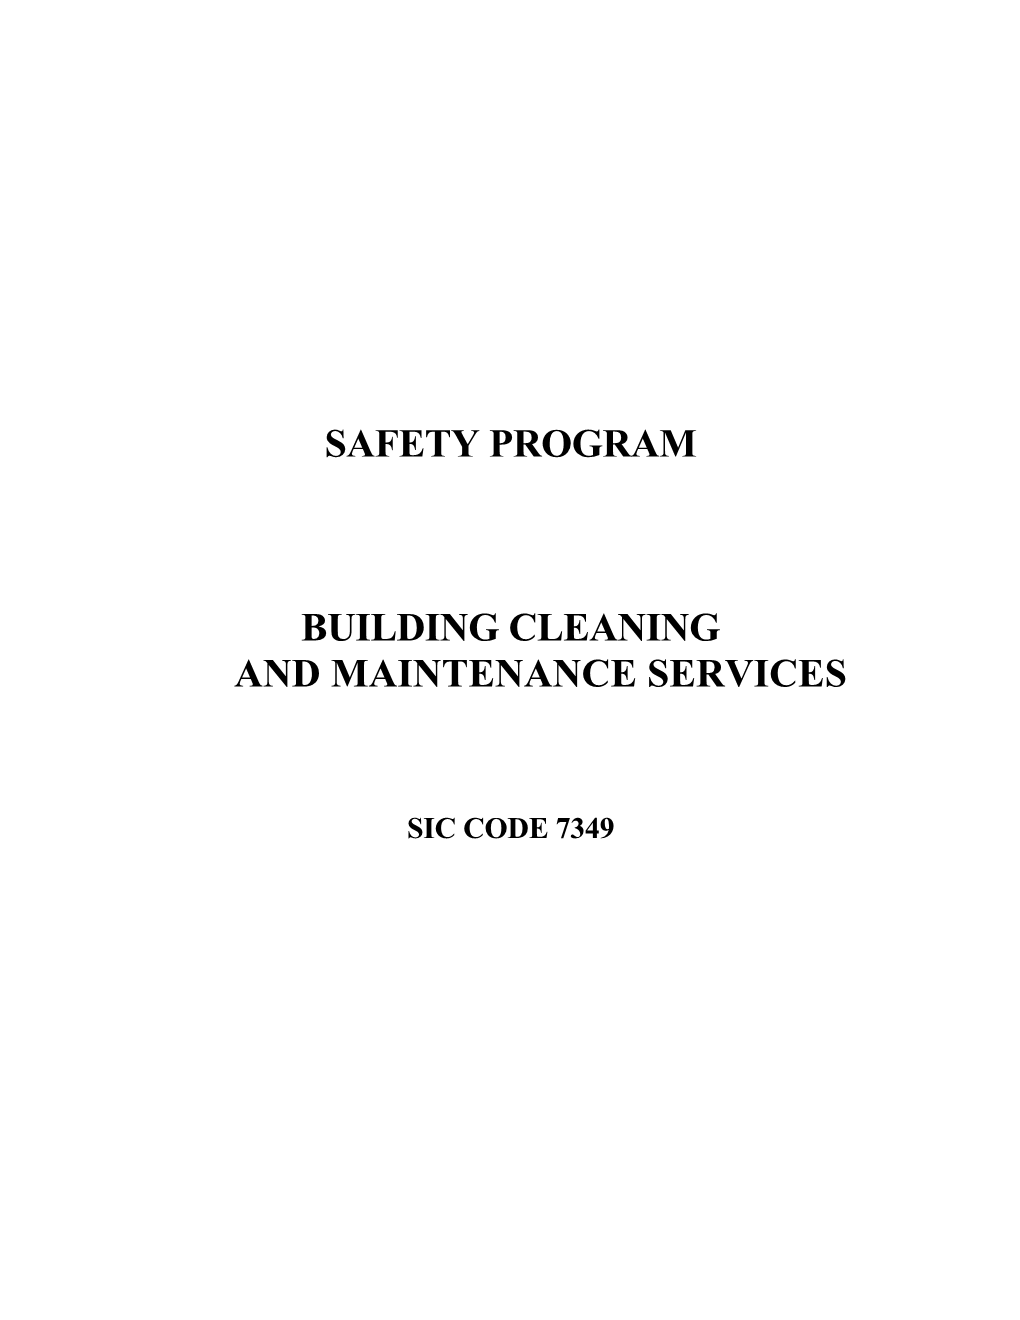 Building Cleaning And Maintenance Safety Program